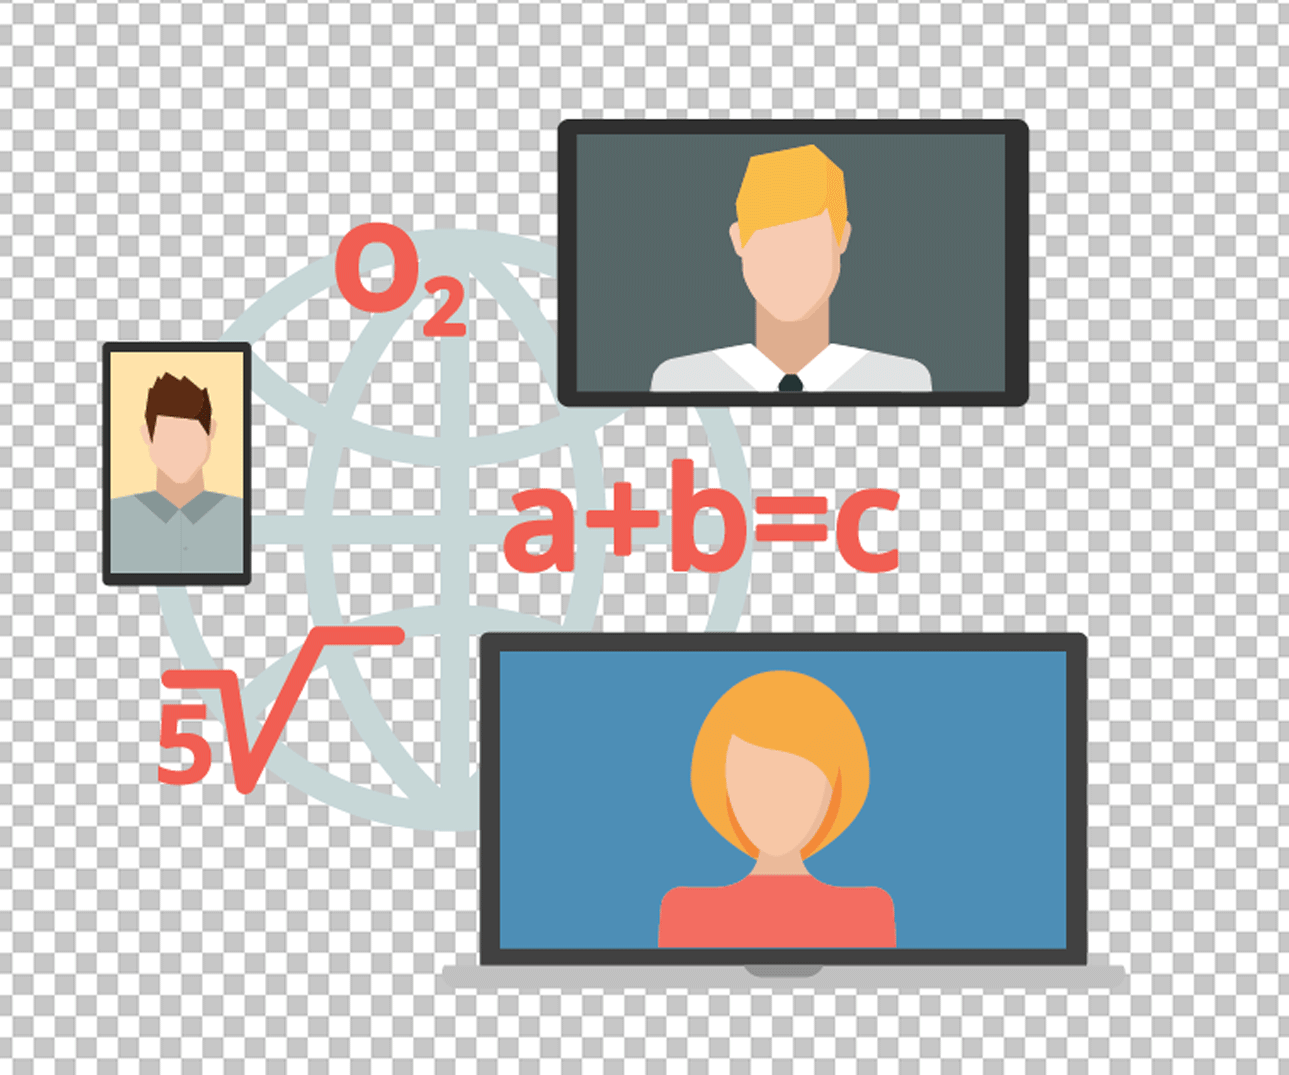 Online math learning PNG image